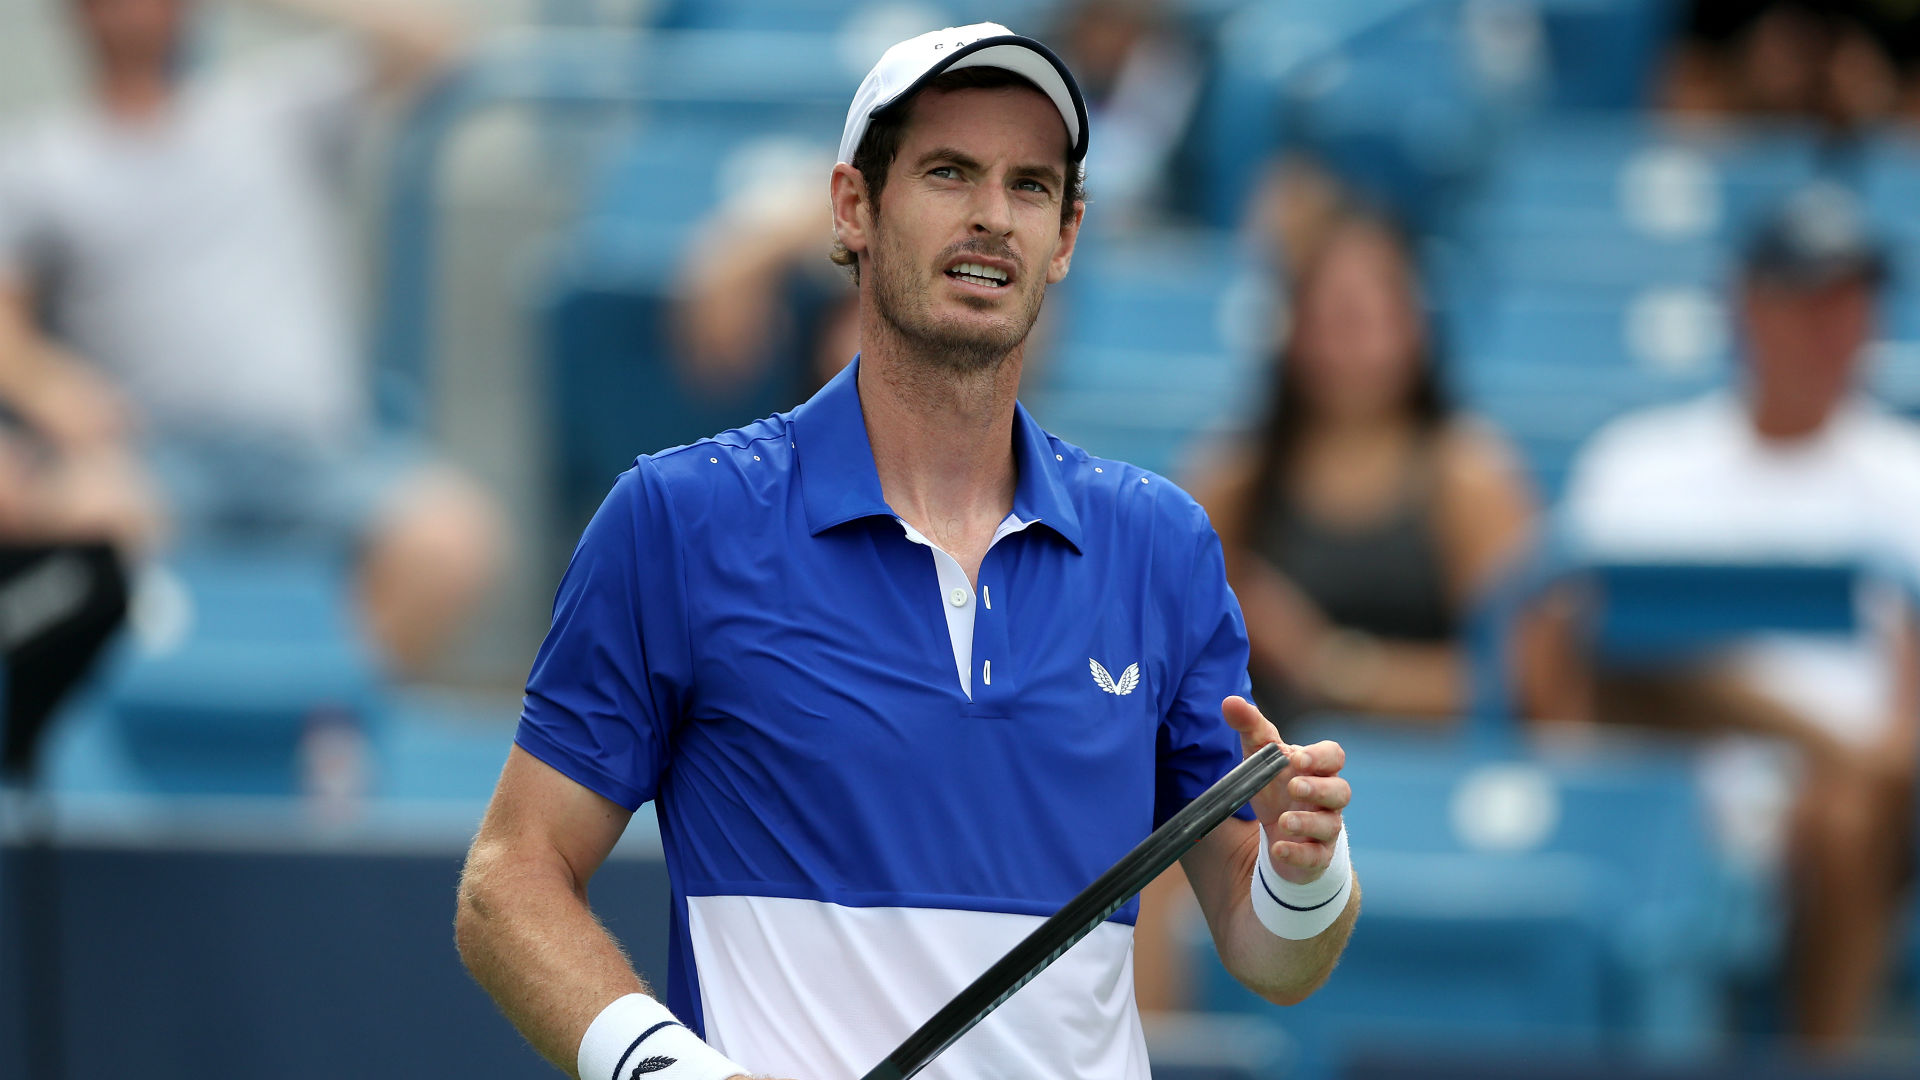 As Andy Murray prepares to face Tennys Sandgren in the opening round, Tomas Berdych overcame Andreas Seppi on Sunday.